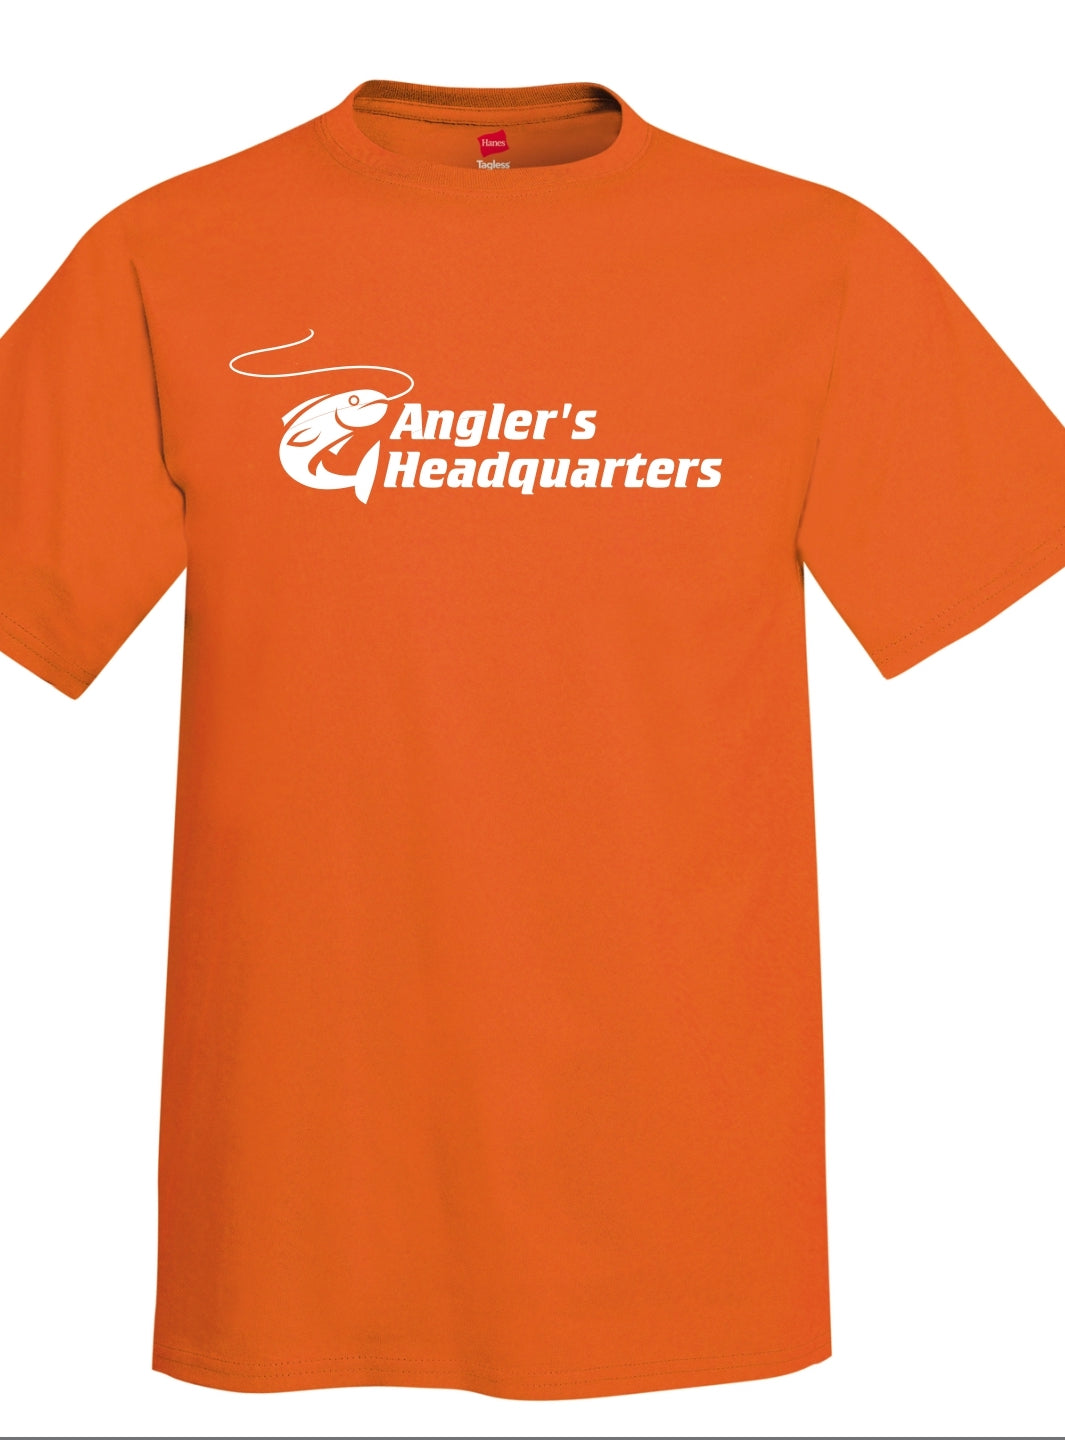 Angler's Headquarters Shirts (Youth Sizes) - Angler's Headquarters